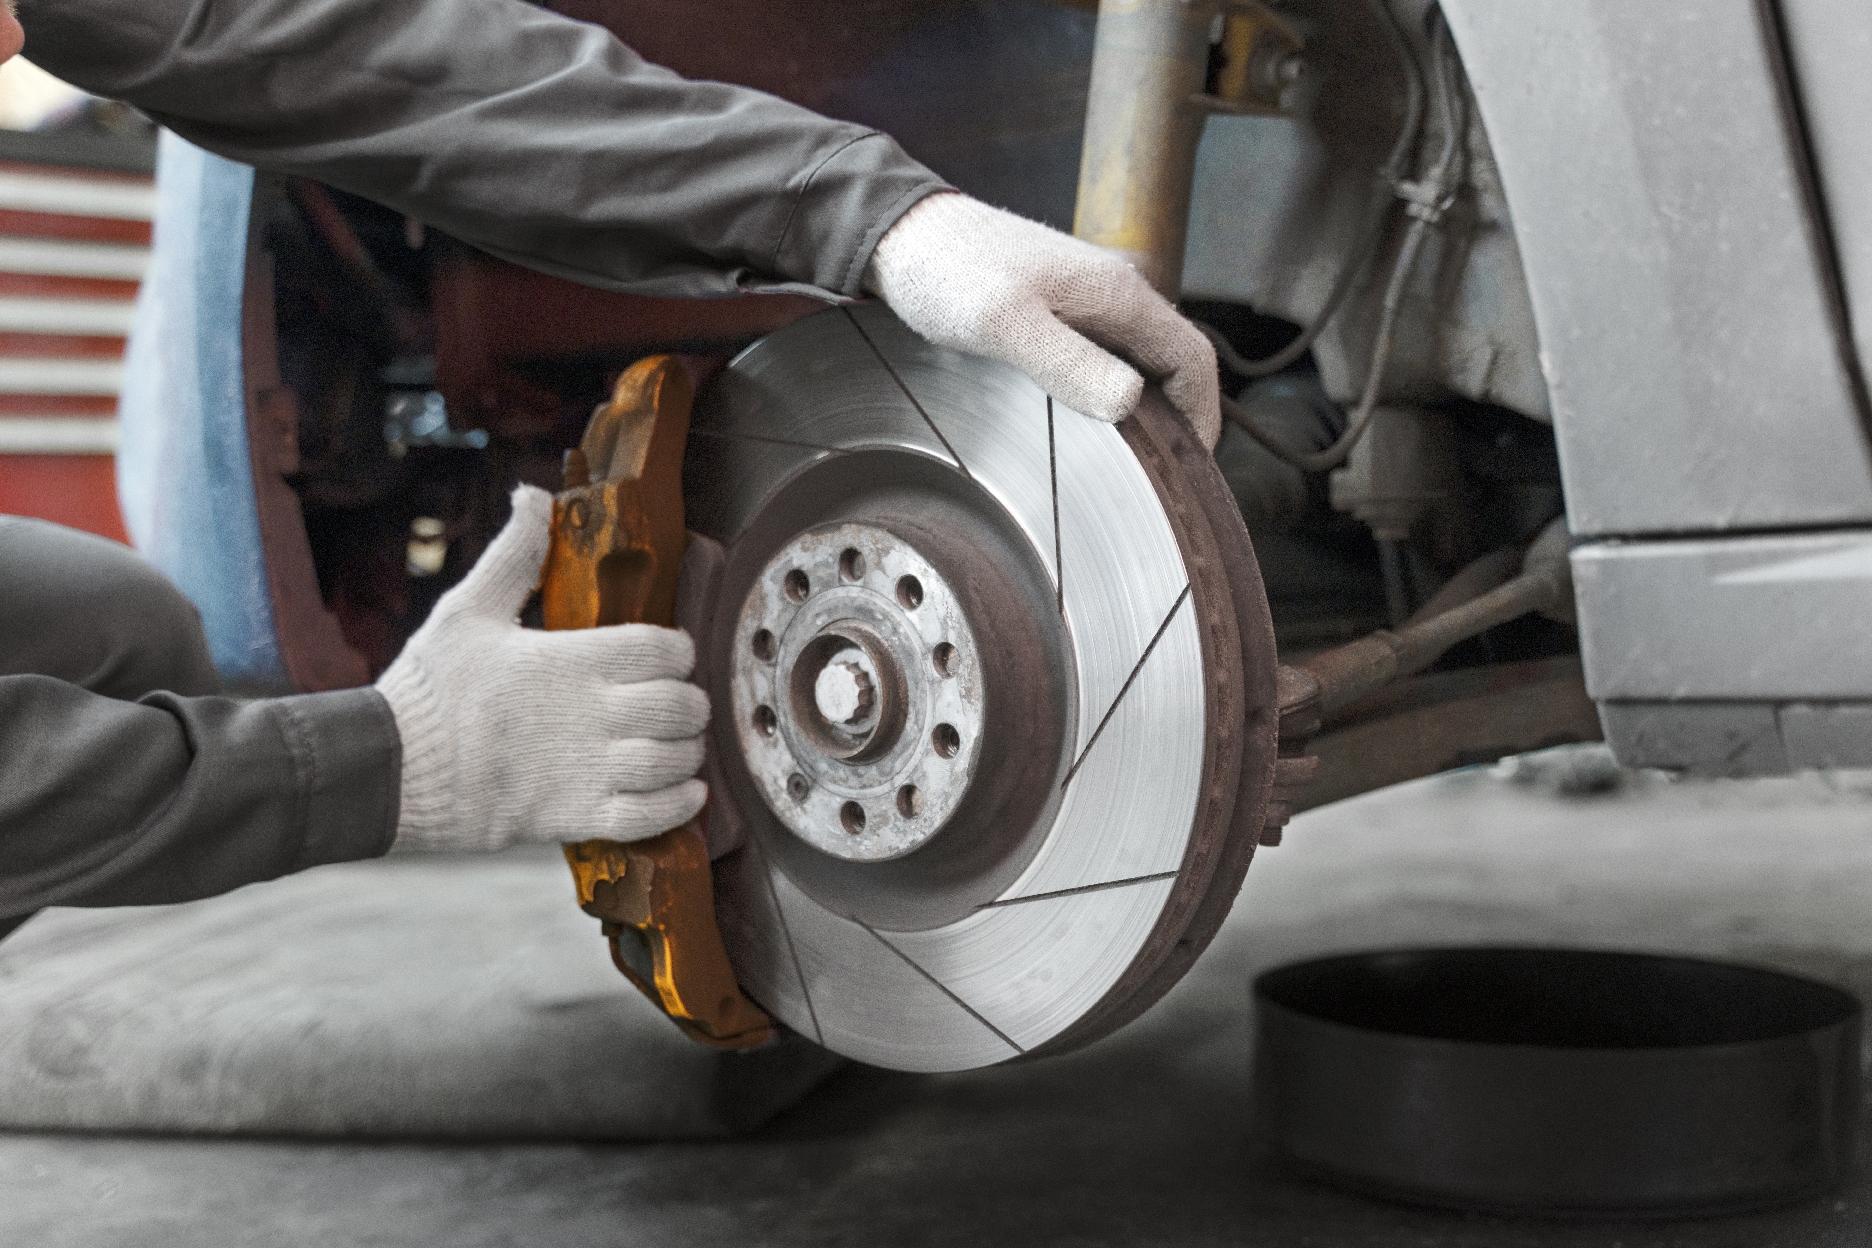 signs your brakes need attention with worker repairing brakes